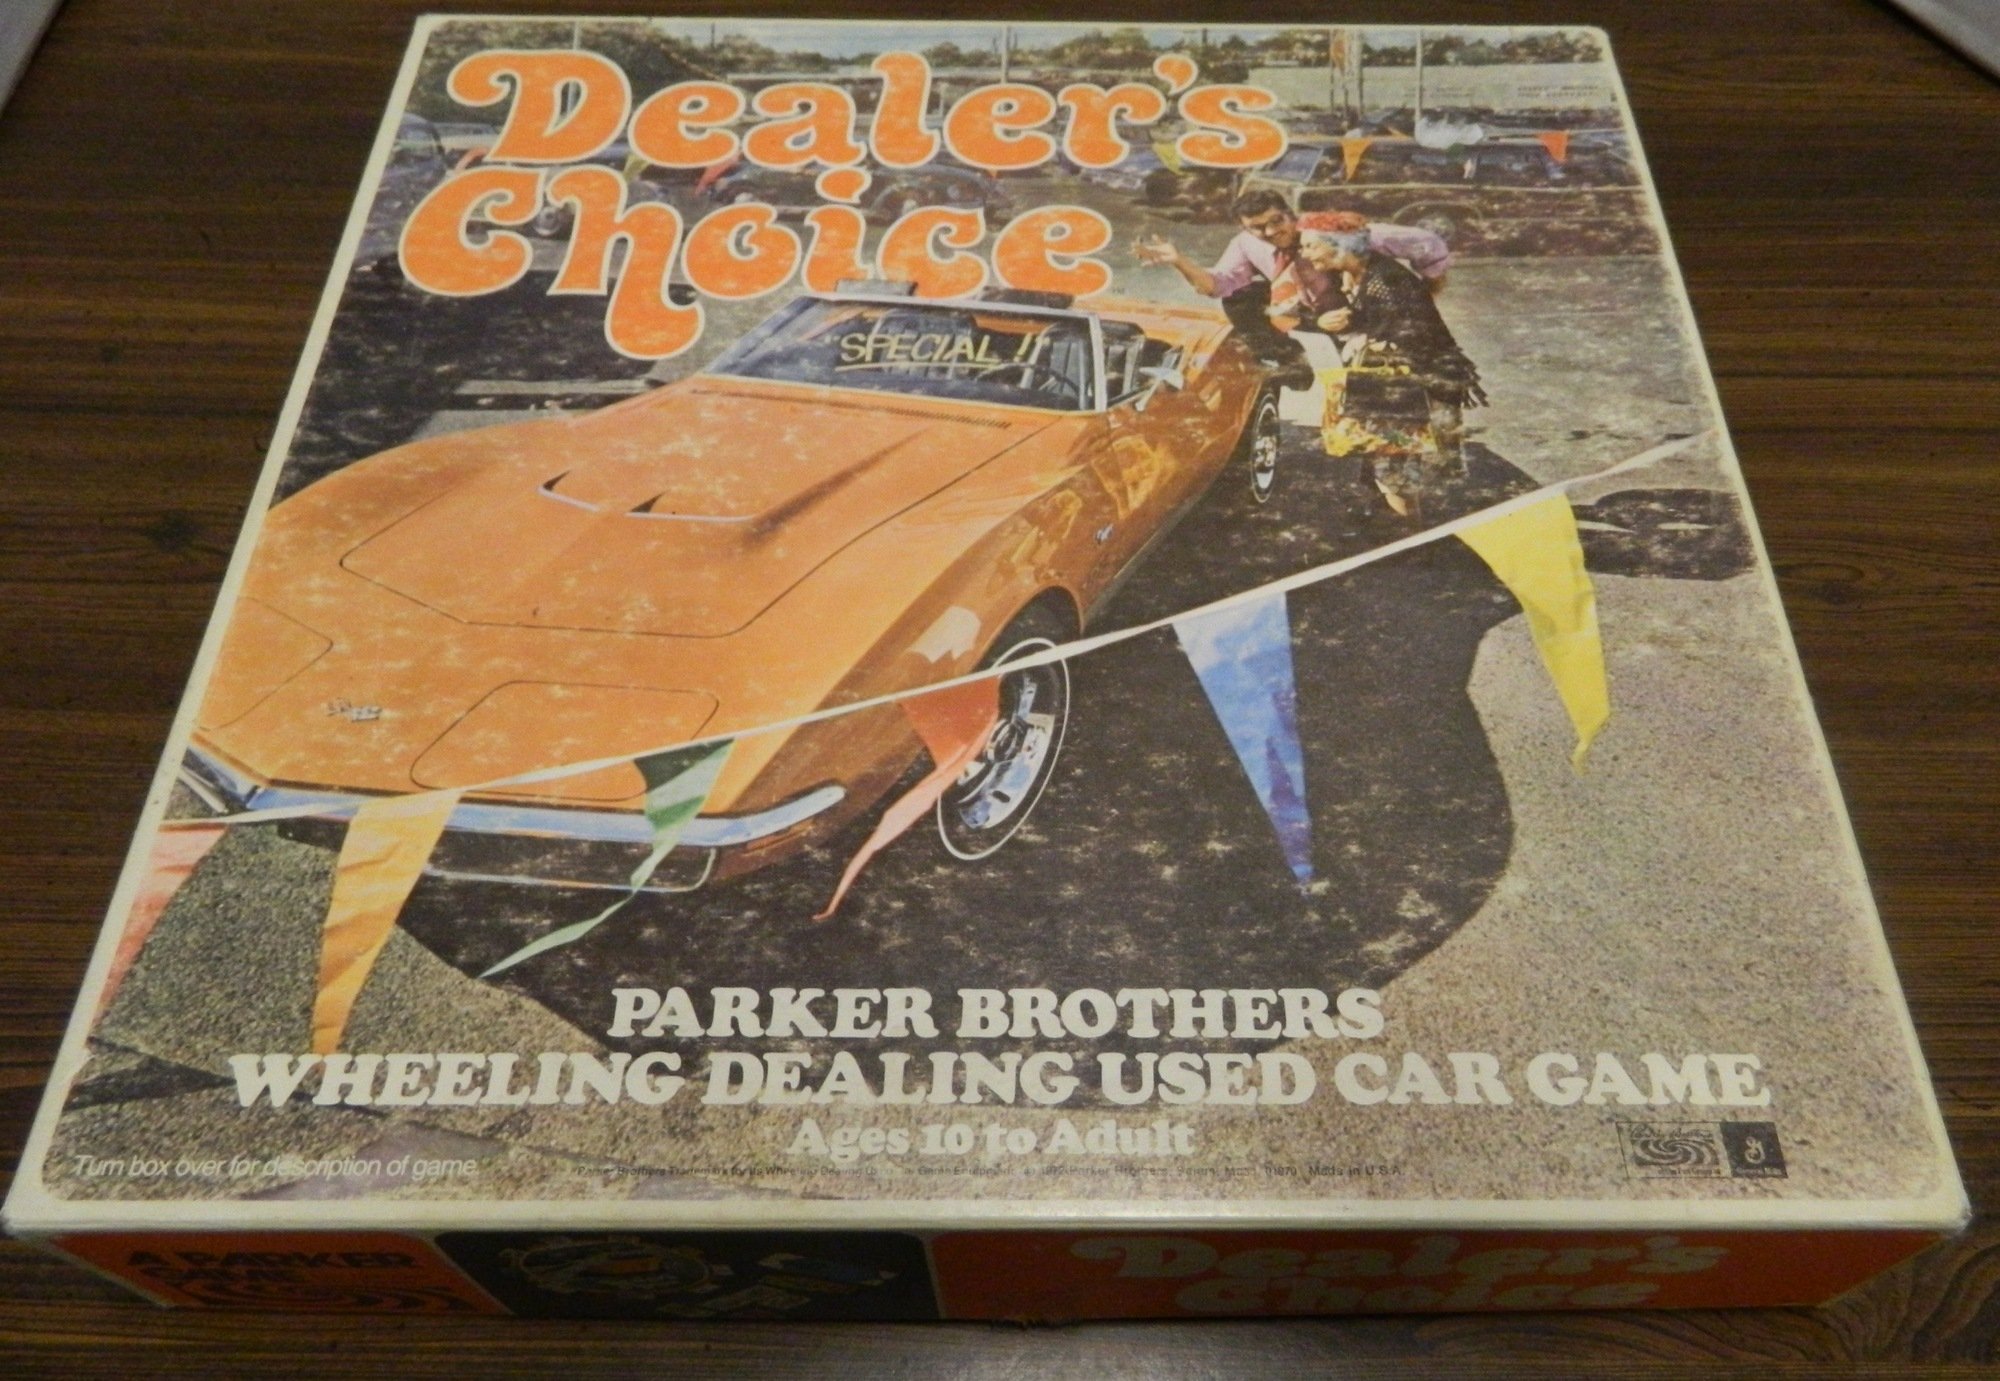 Dealer’s Choice Board Game Review and Rules